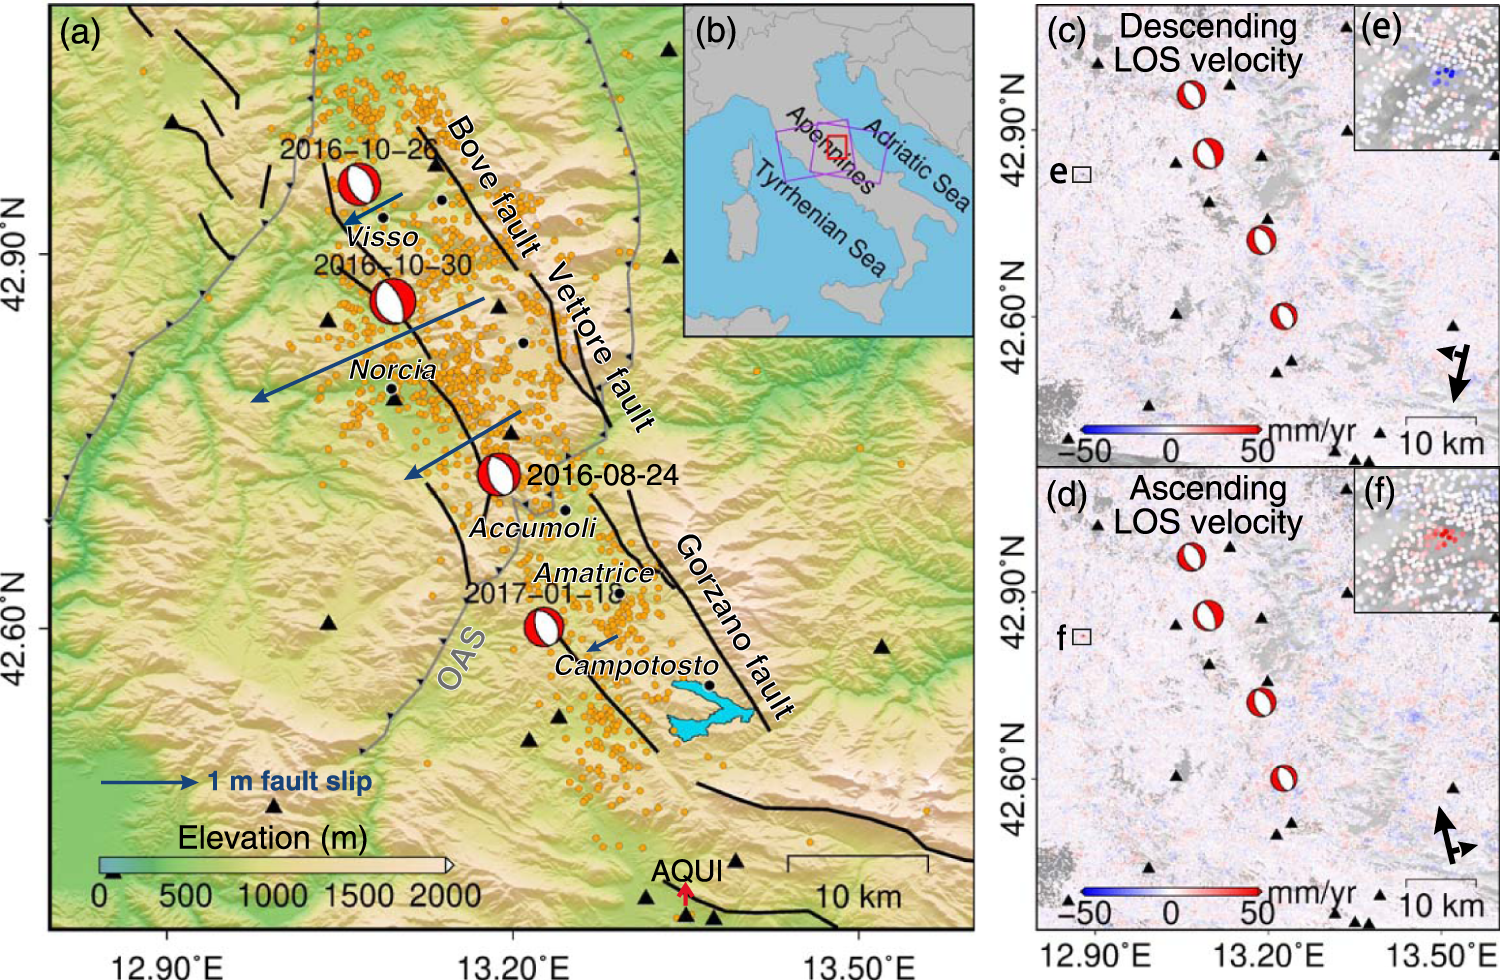 Triggering and recovery of earthquake accelerated landslides in Central  Italy revealed by satellite radar observations | Nature Communications